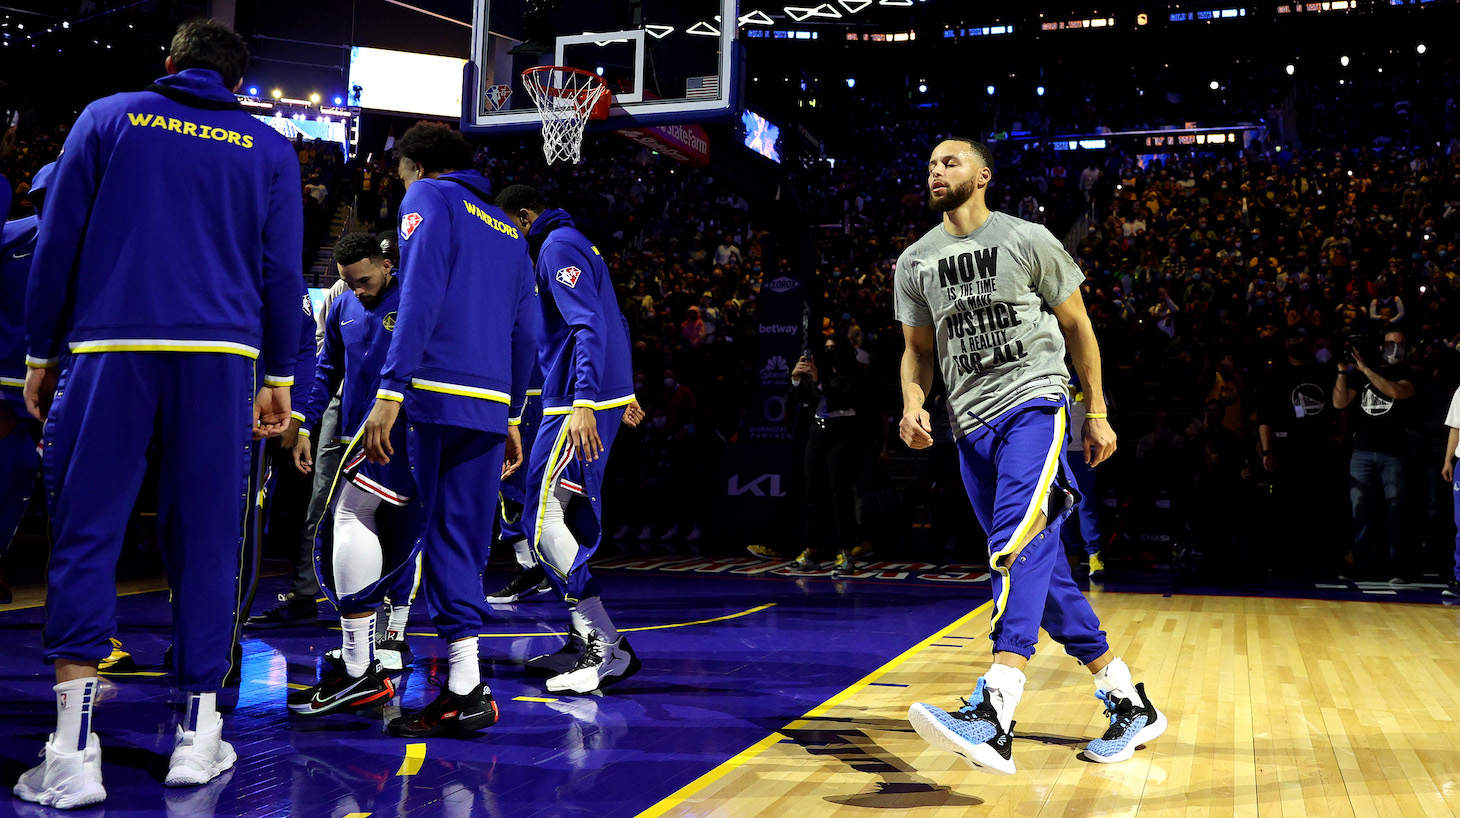 SAN FRANCISCO, CALIFORNIA - JANUARY 18: Stephen Curry #30 of the Golden State Warriors runs around his teammates during player introductions before their game against the Detroit Pistons at Chase Center on January 18, 2022 in San Francisco, California. NOTE TO USER: User expressly acknowledges and agrees that, by downloading and/or using this photograph, User is consenting to the terms and conditions of the Getty Images License Agreement. (Photo by Ezra Shaw/Getty Images)